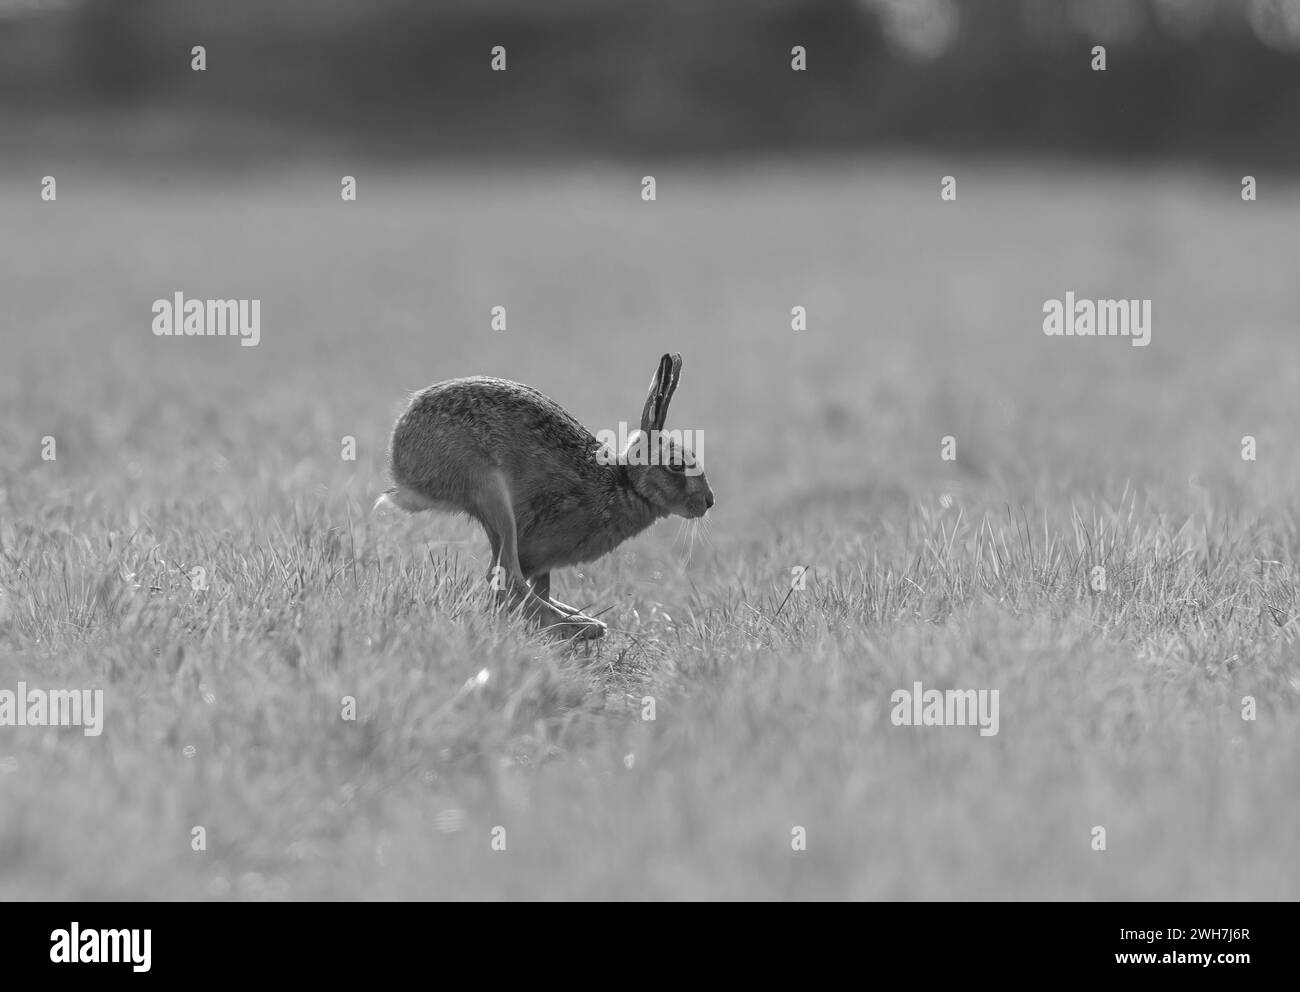 The Shape Shifter - Classic accelerating Brown Hare shape, back legs ahead of front legs, flexible spine . Shot in black and white. Suffolk, UK Stock Photo